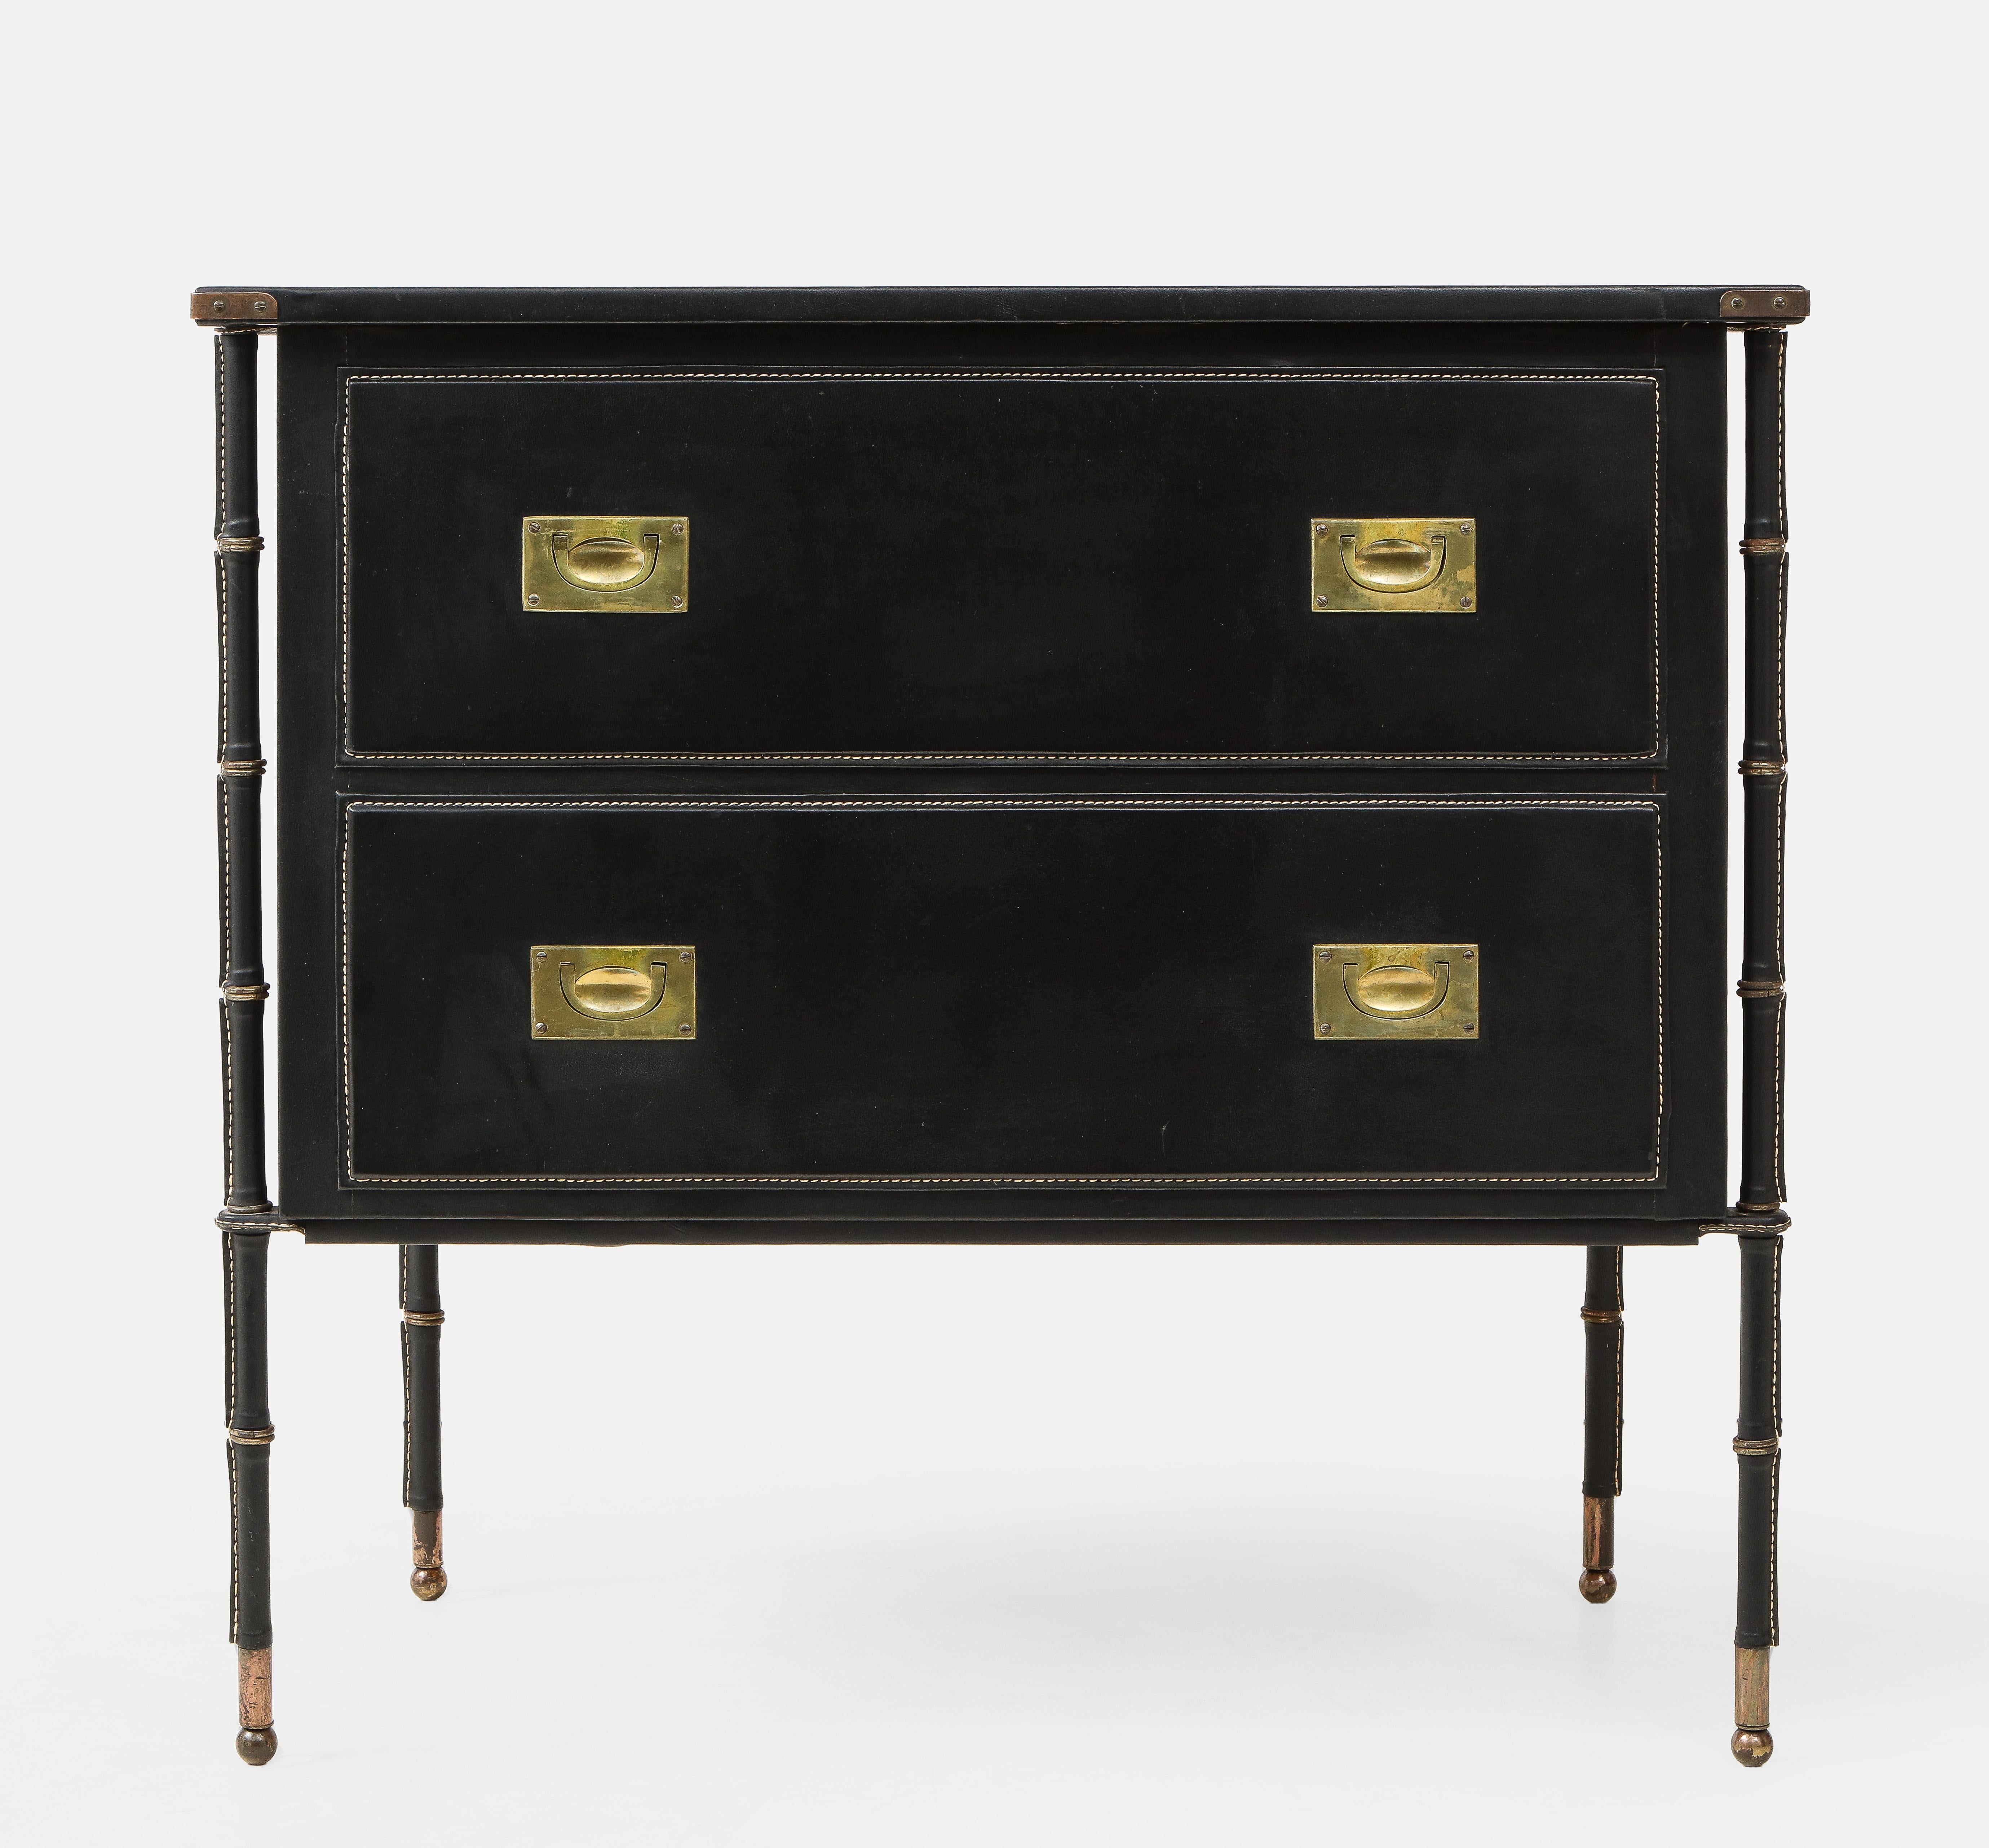 Jacques Adnet rare two-drawer commode, dresser or chest of drawers covered in black saddle-stitched skaï with faux bamboo legs and brass drawer pulls, France, 1950s. This collector's commode is in excellent condition and is free of tears or other